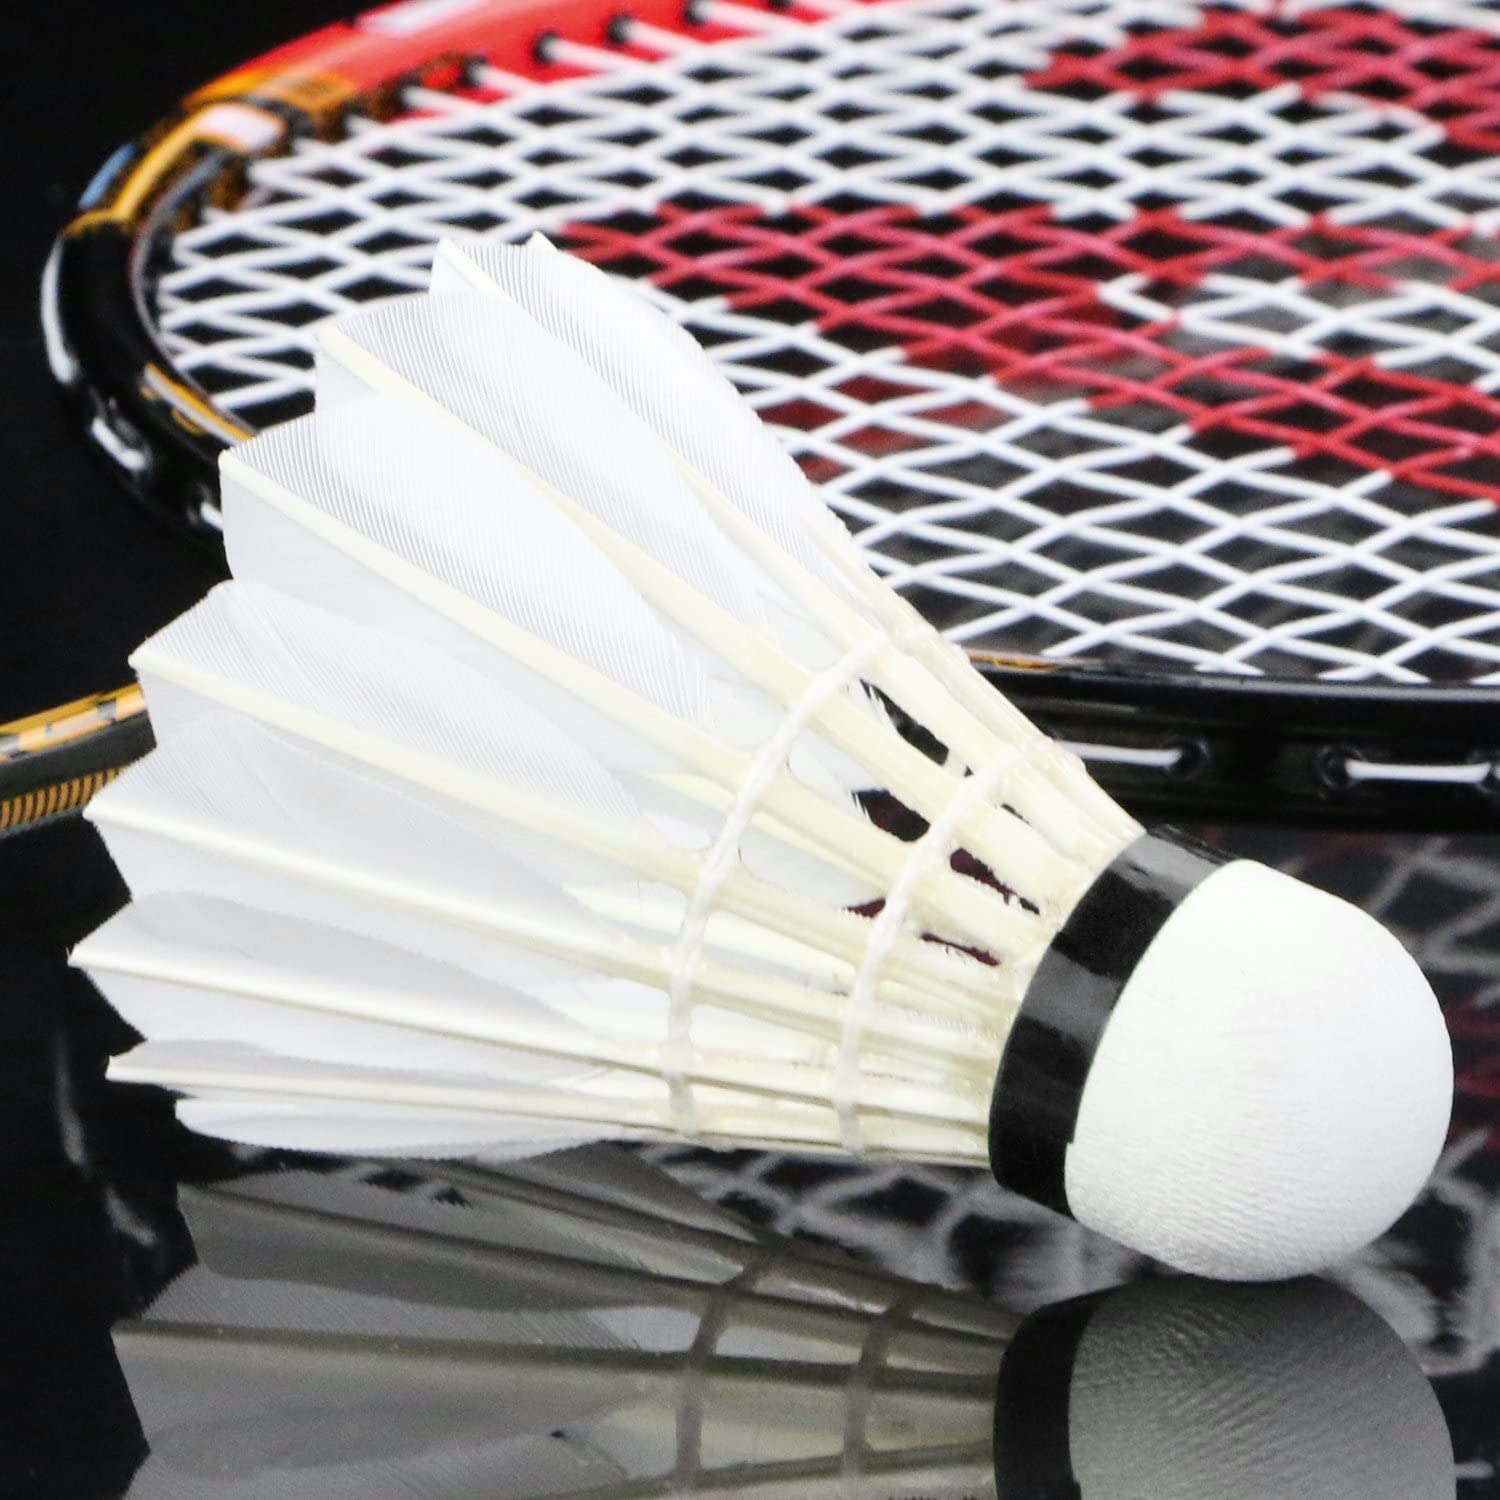 badminton-set-with-net-and-shuttlecocks